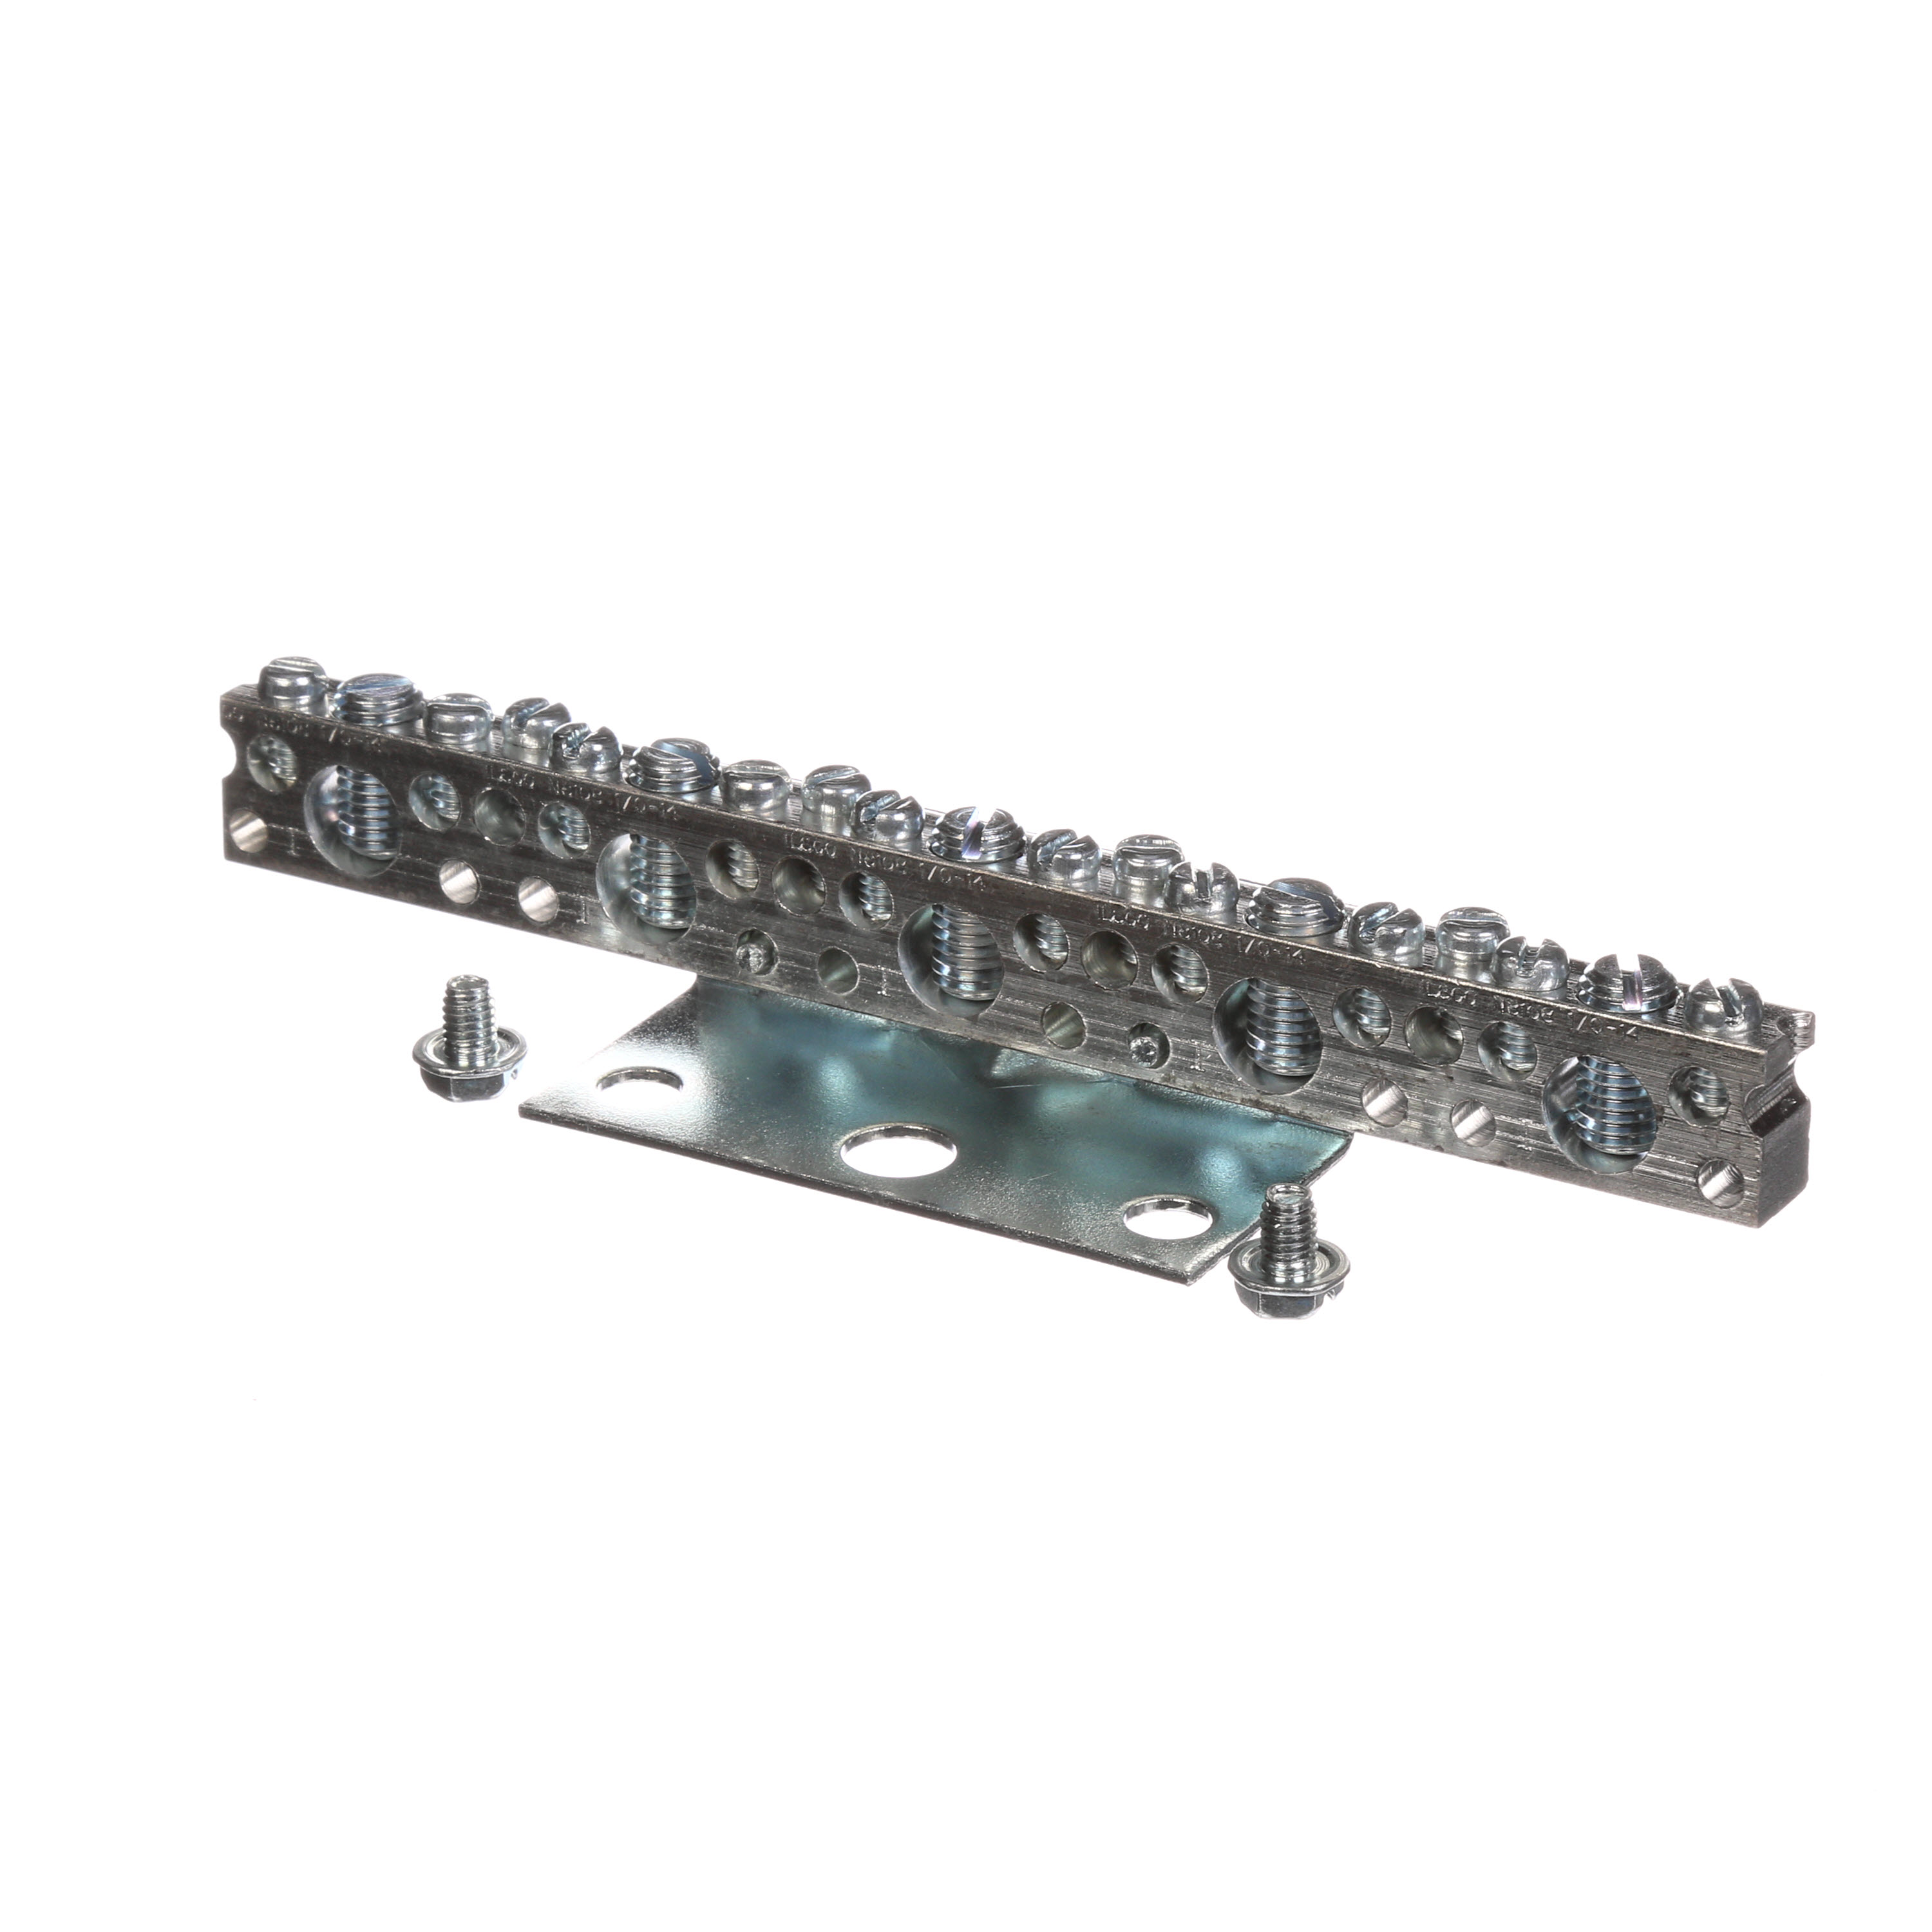 Siemens Low Voltage Residential Specialty Load Centers Miscellaneous Grounding bars (Al/Cu). Large connectors rated for (one 14-1/0, or 2-3 14-10), small connectors rated for (one 14-6 or two #14-12) length 5-3/4 IN. Connectors 14 small and 5 large.